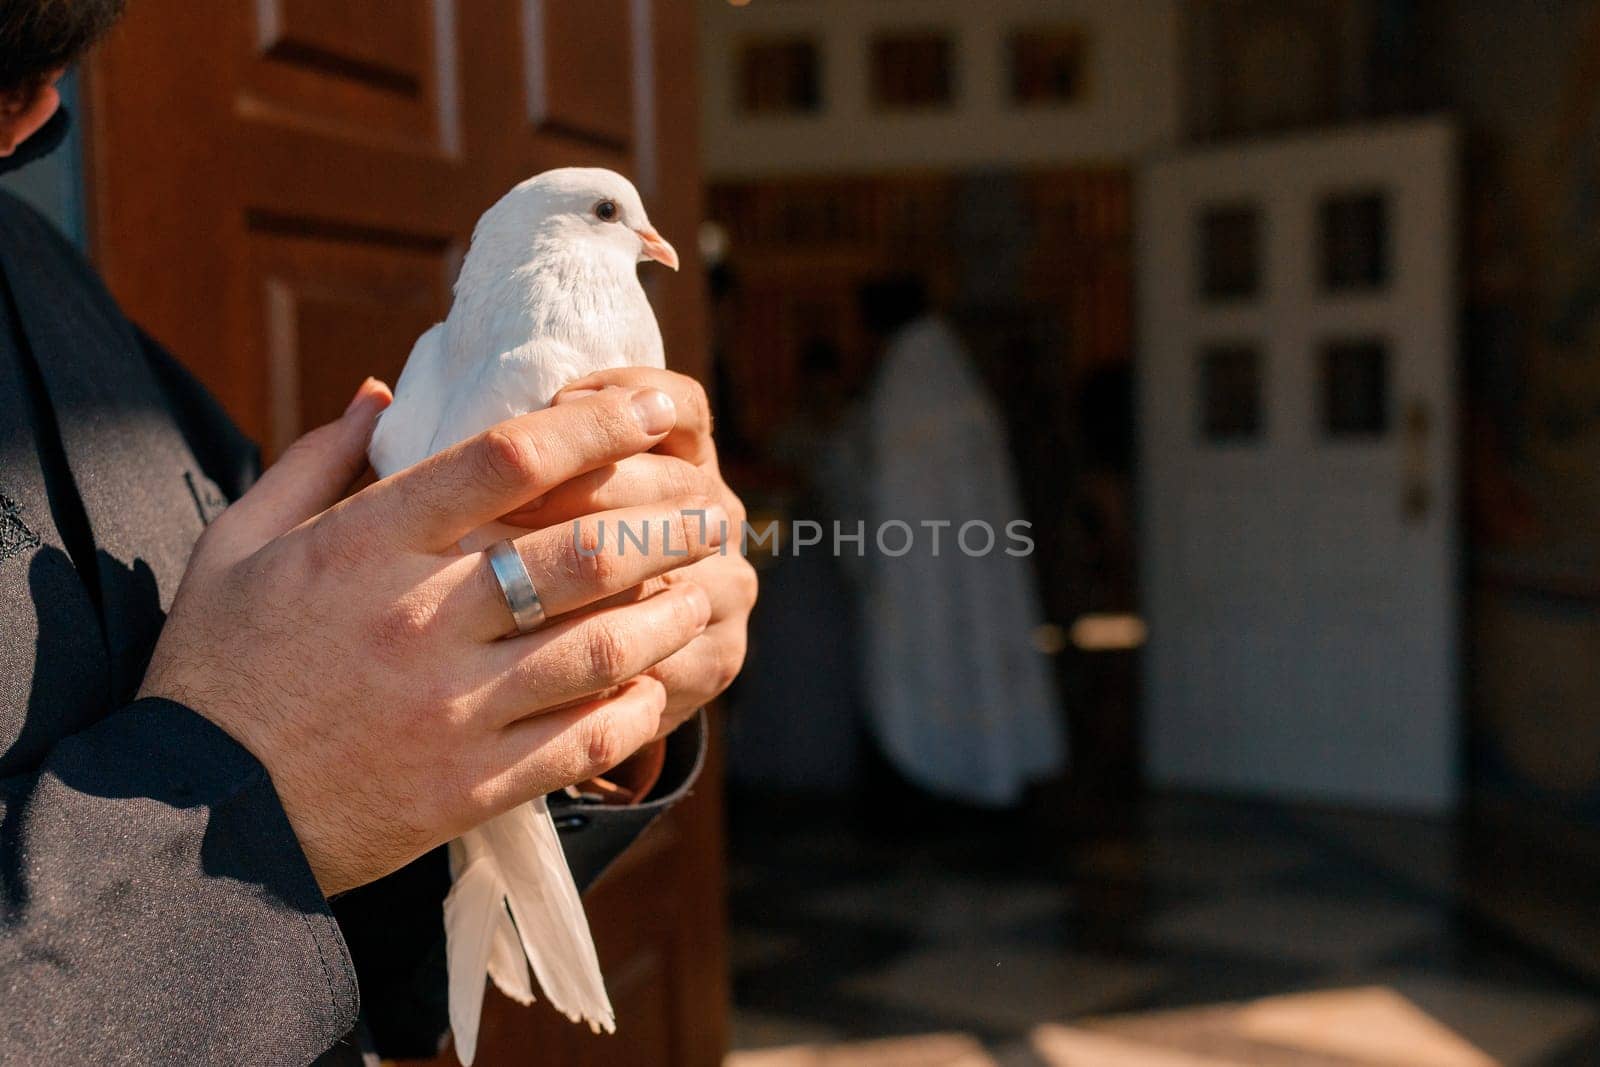 White dove in hands ready to be released into the sky after a wedding ceremony in an Orthodox Christian church by Rom4ek